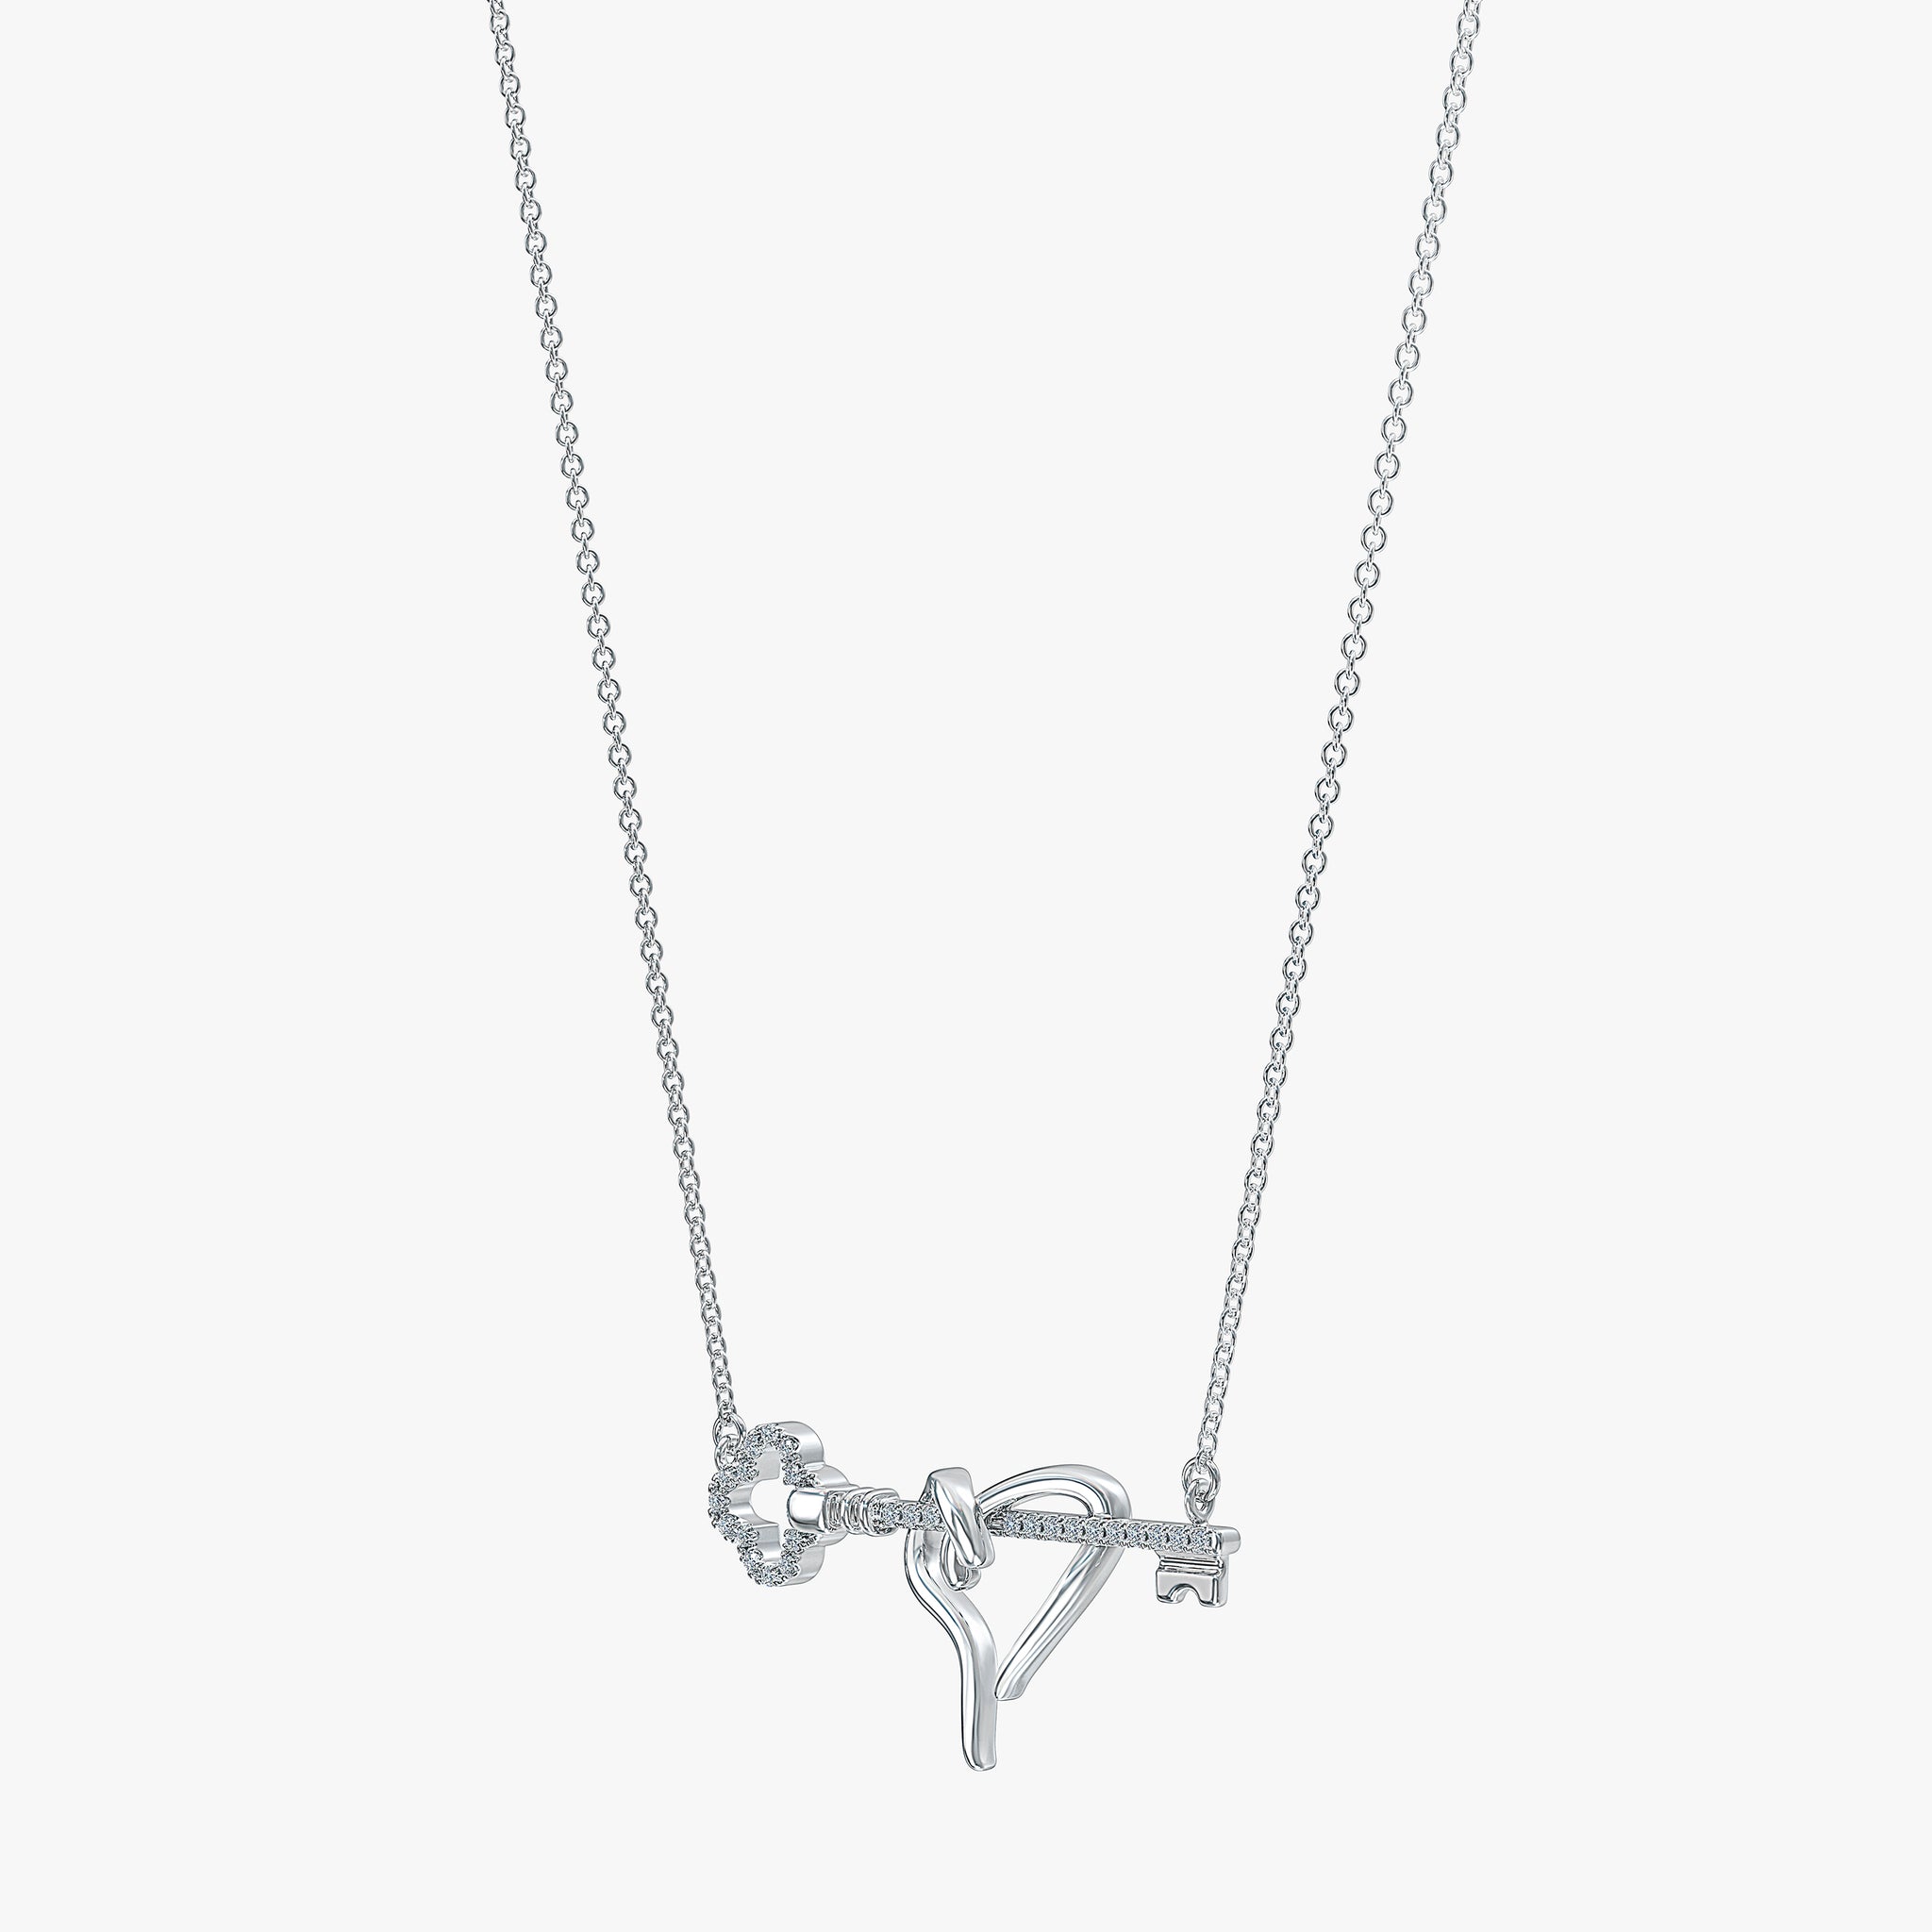 J'EVAR Sterling Silver Clover Heart & Key ALTR Lab Grown Diamond Necklace Perspective View